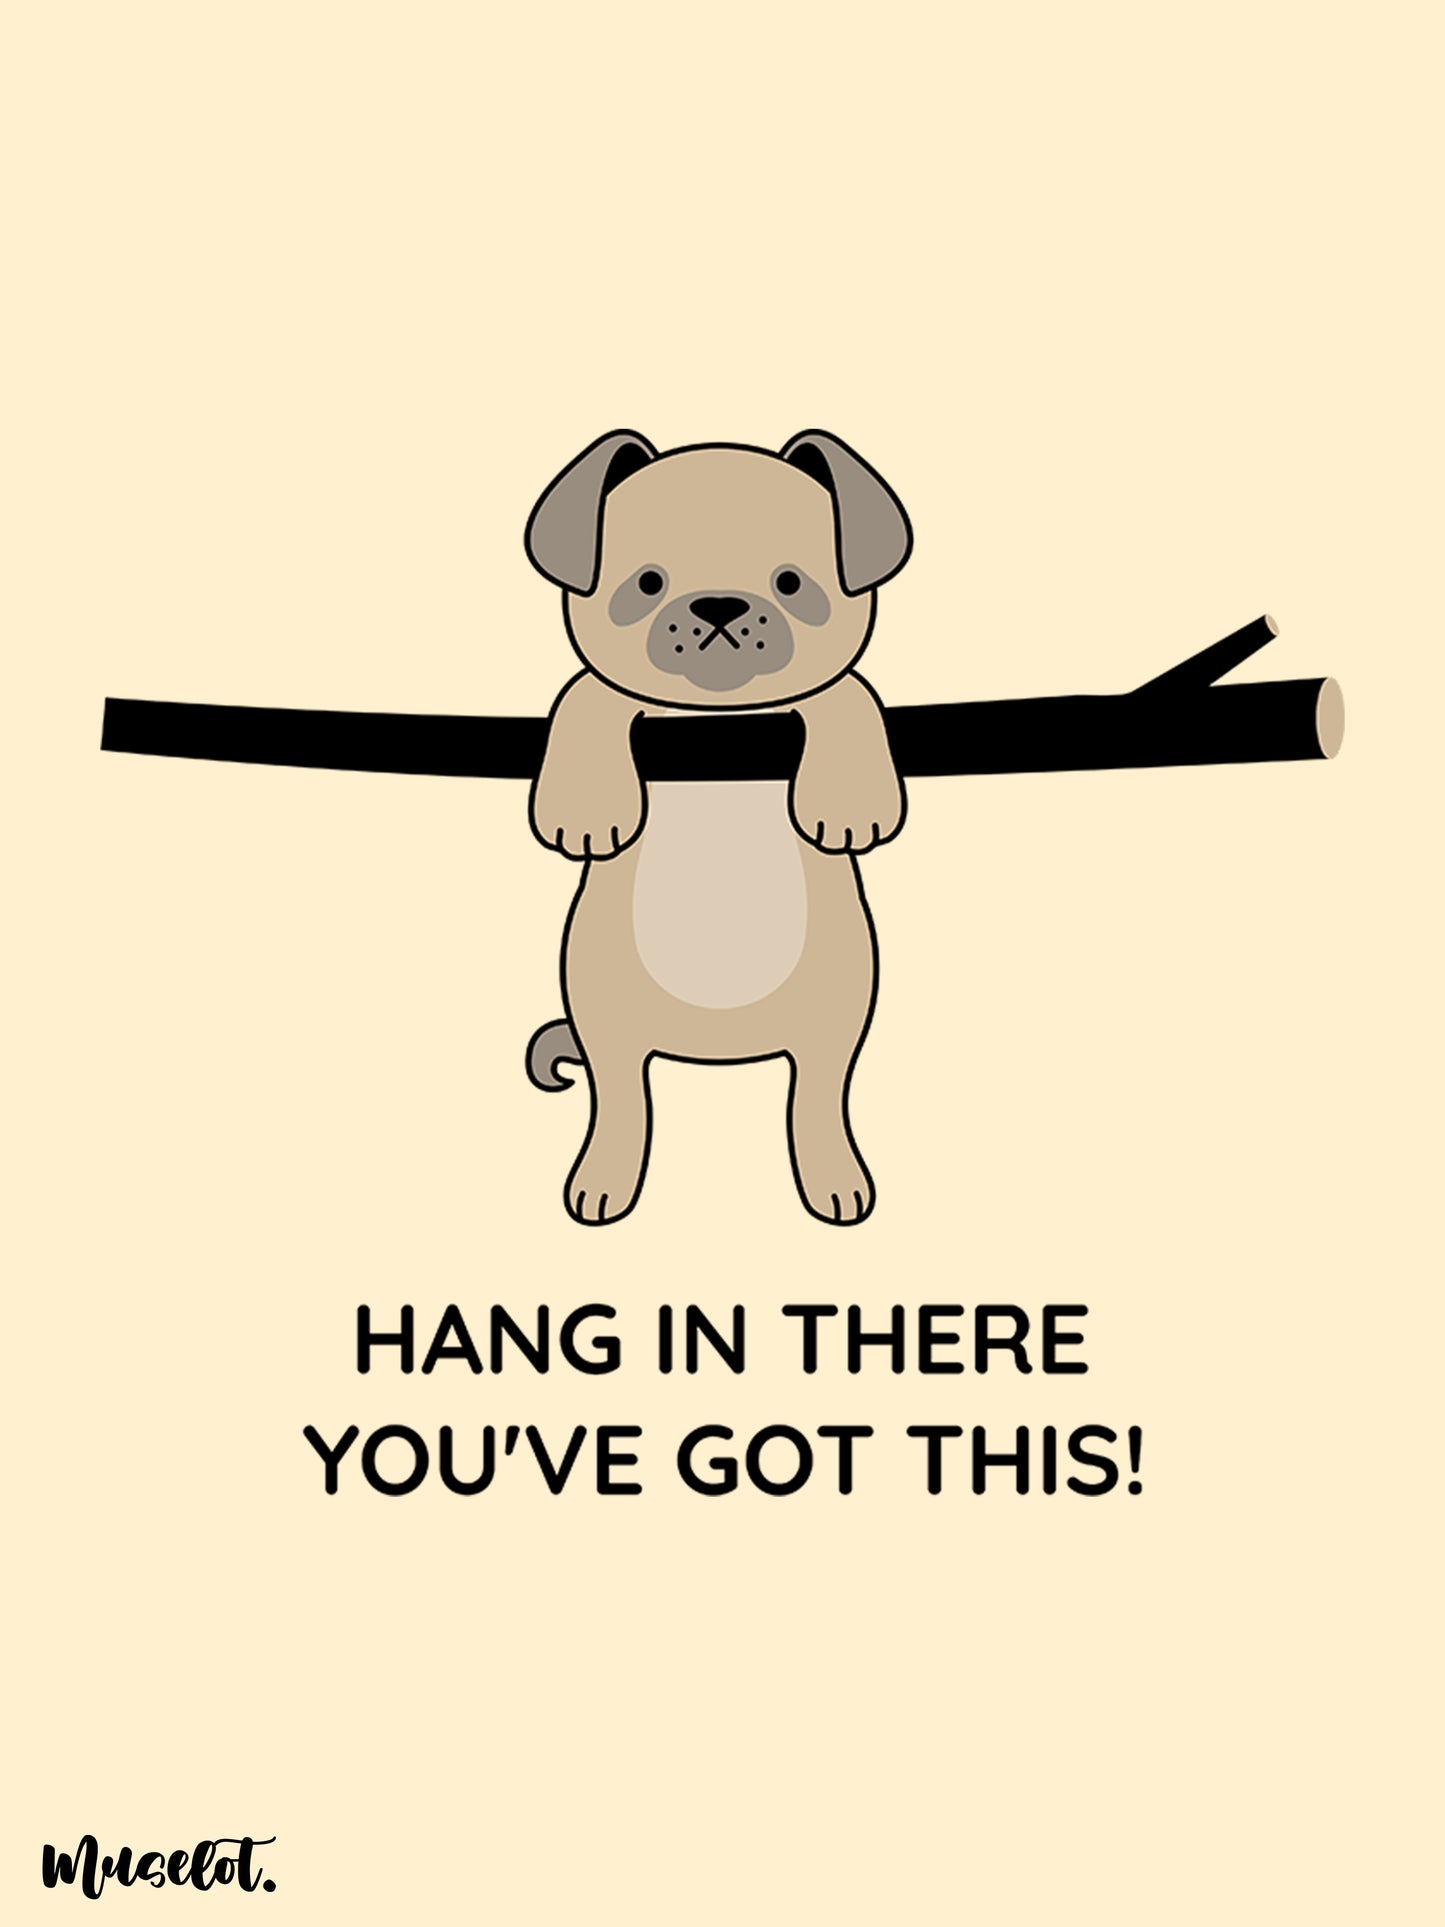 Hang in there you've got this illustrated cute and motivational phone case for all models of brands like apple, samsung, oppo, vivo, realme, oneplus, nokia, google pixel, xiaomi, lenovo, and moto